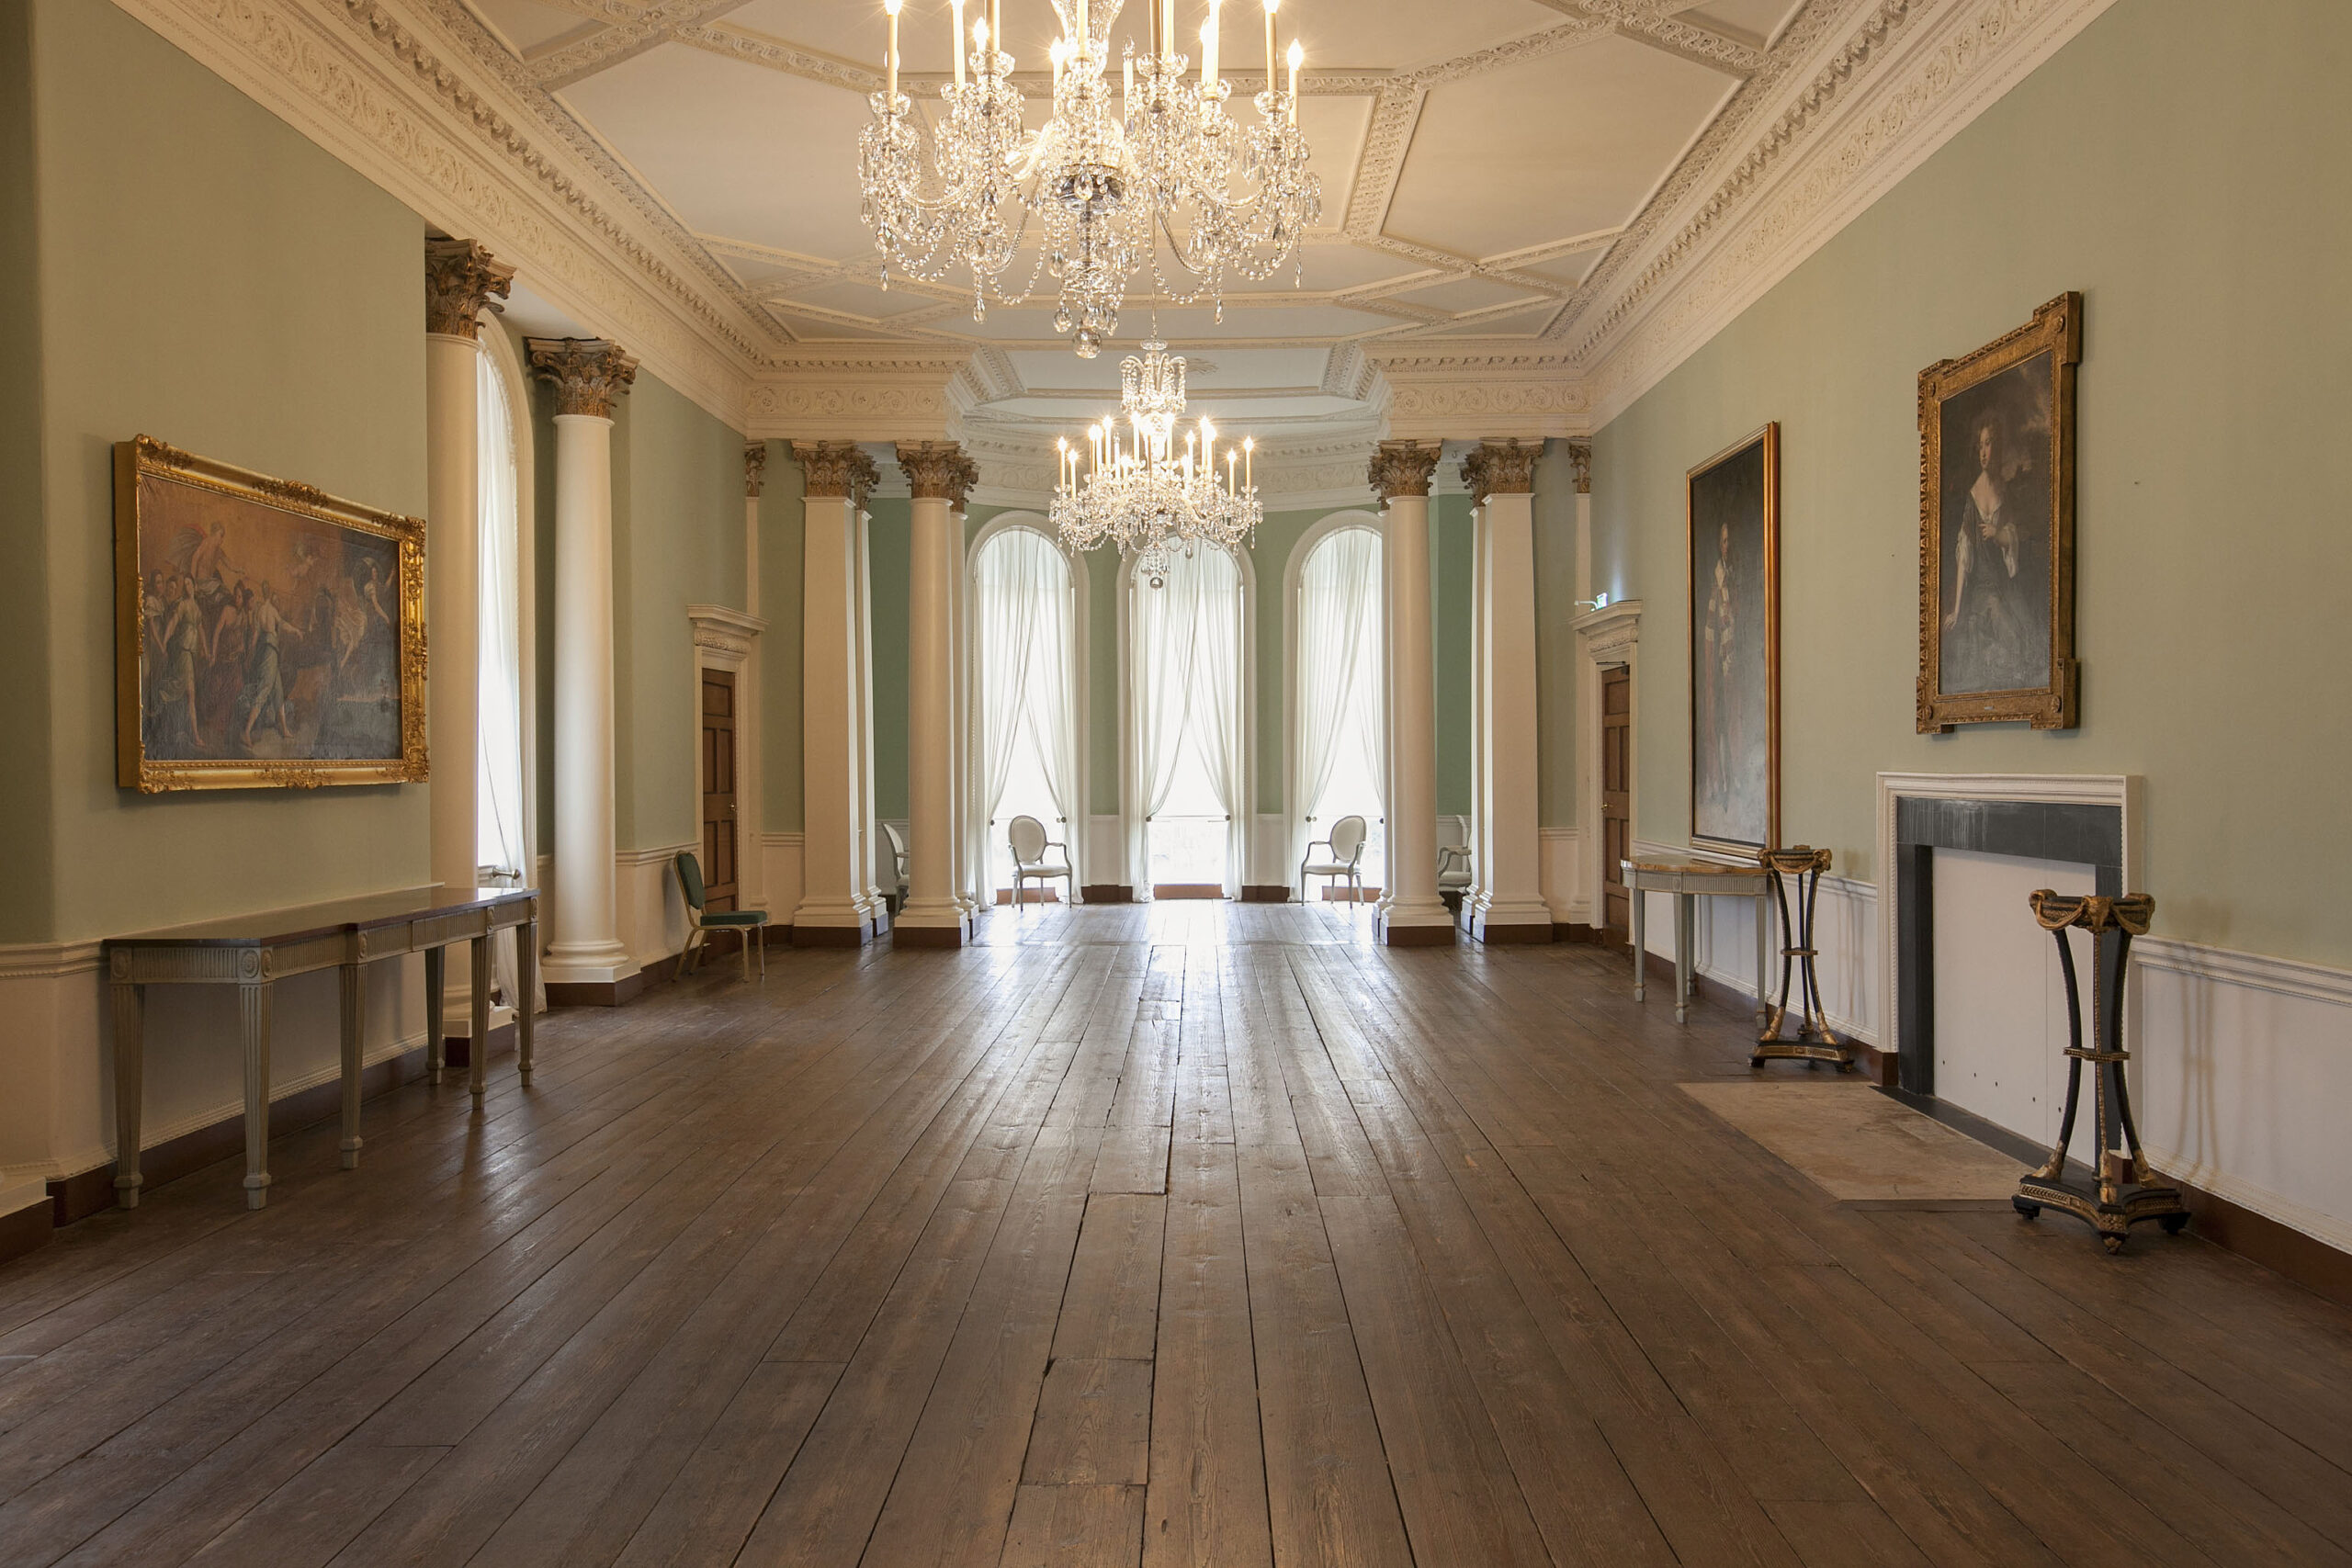 The Ballroom. A long room with arched windows in a bow area at the end of the room. There is a polished wooden floor, there are two ornate chandeliers and paintings on either side of the room. Two columns with ornate capitels flank the bow area.